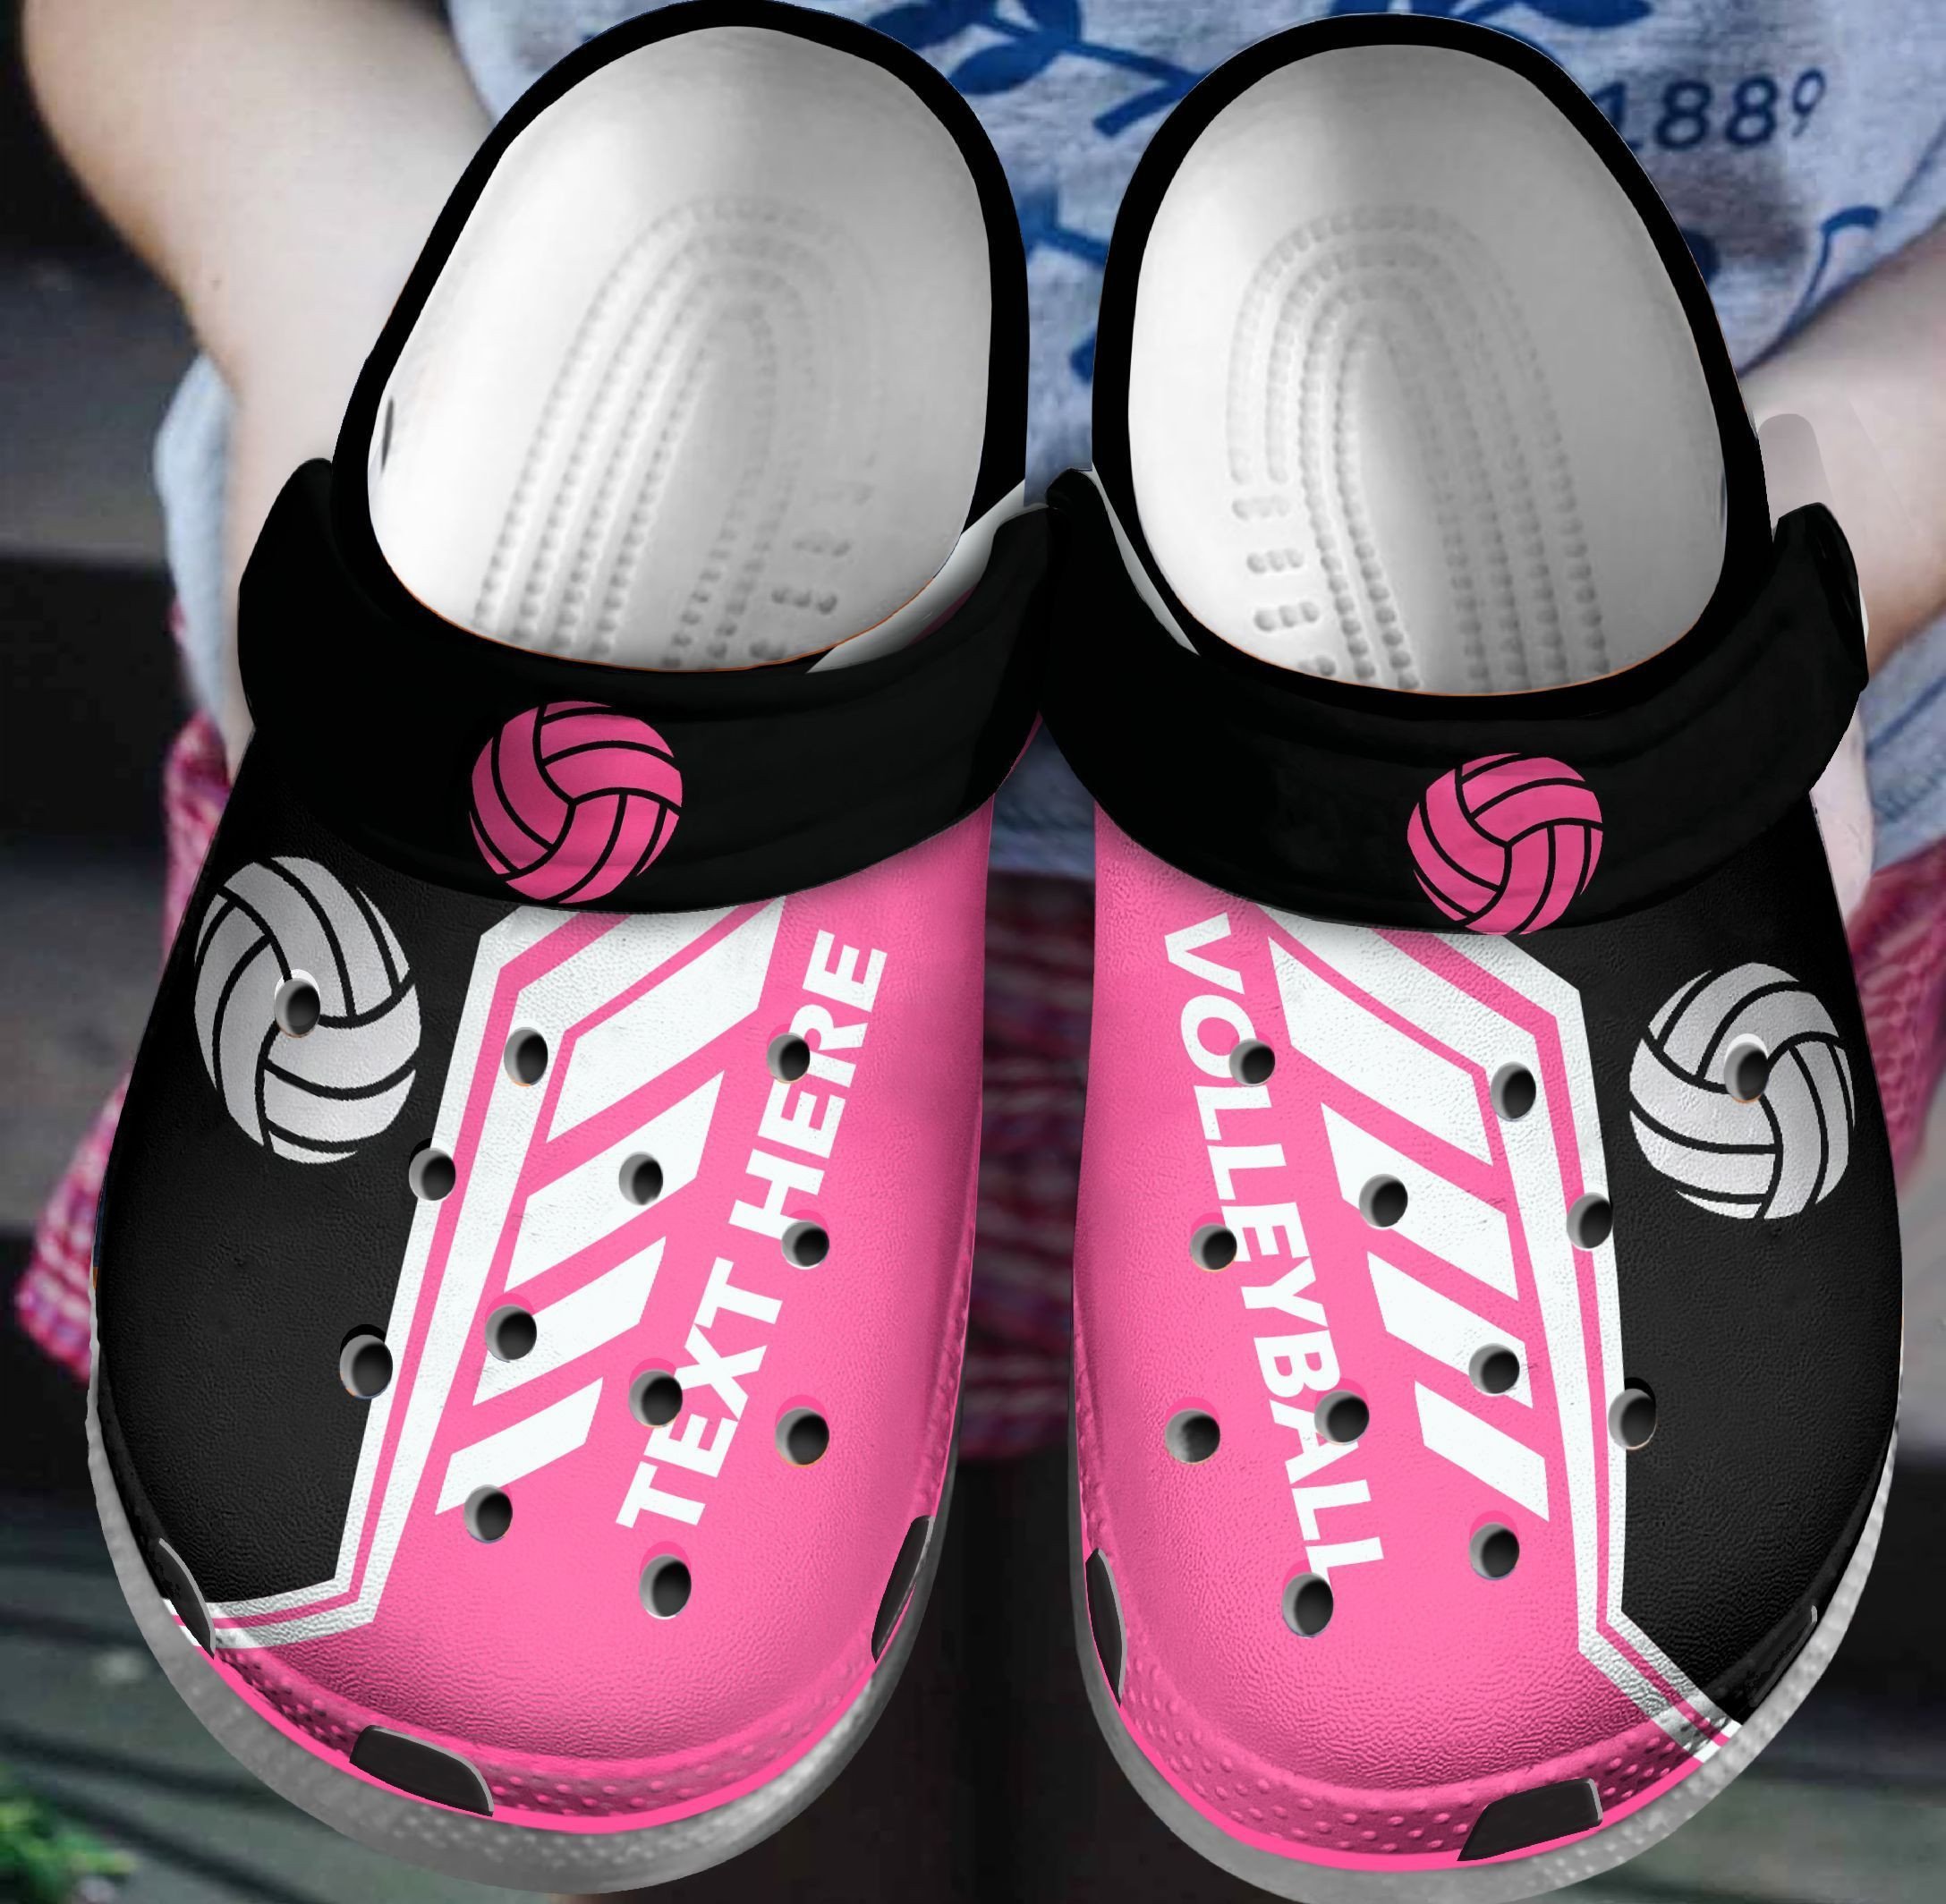 Volleyball Black & Pink Clog Shoes#Hd